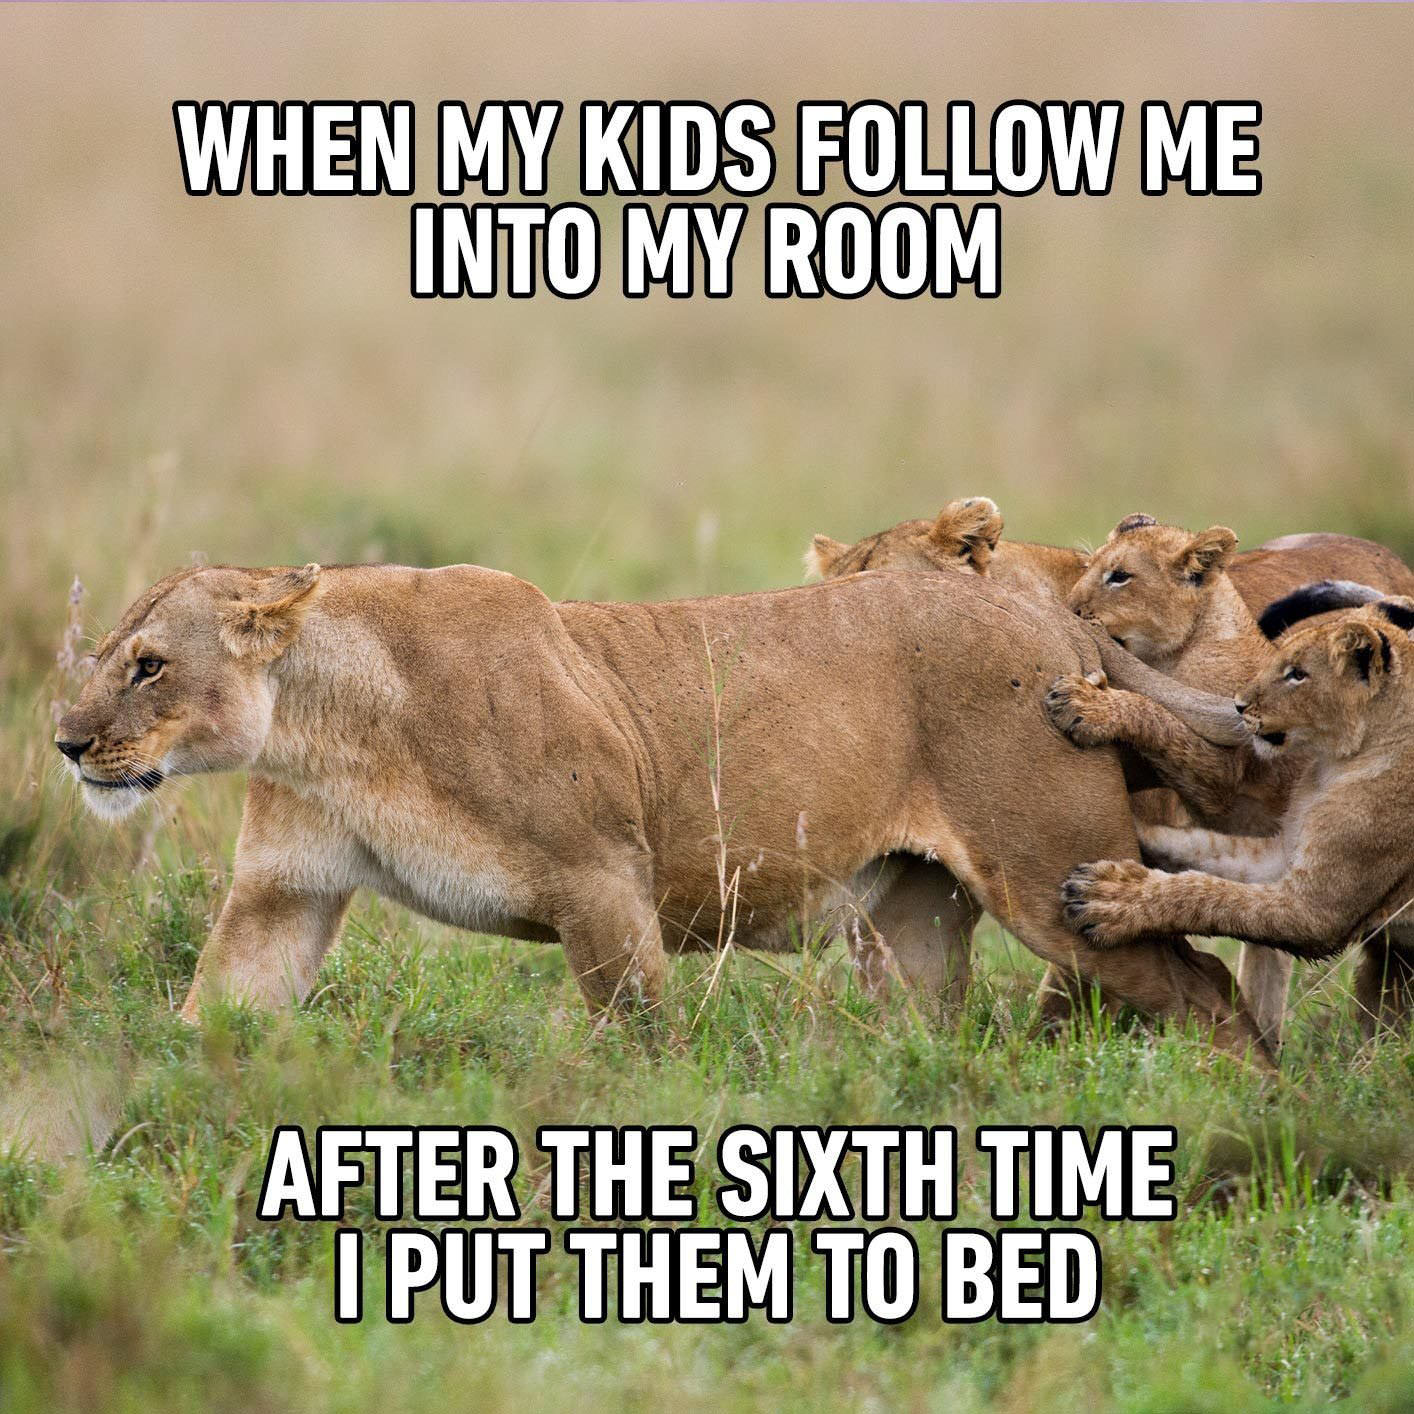 The Funniest Mother-Son Memes That Will Make You LOL!